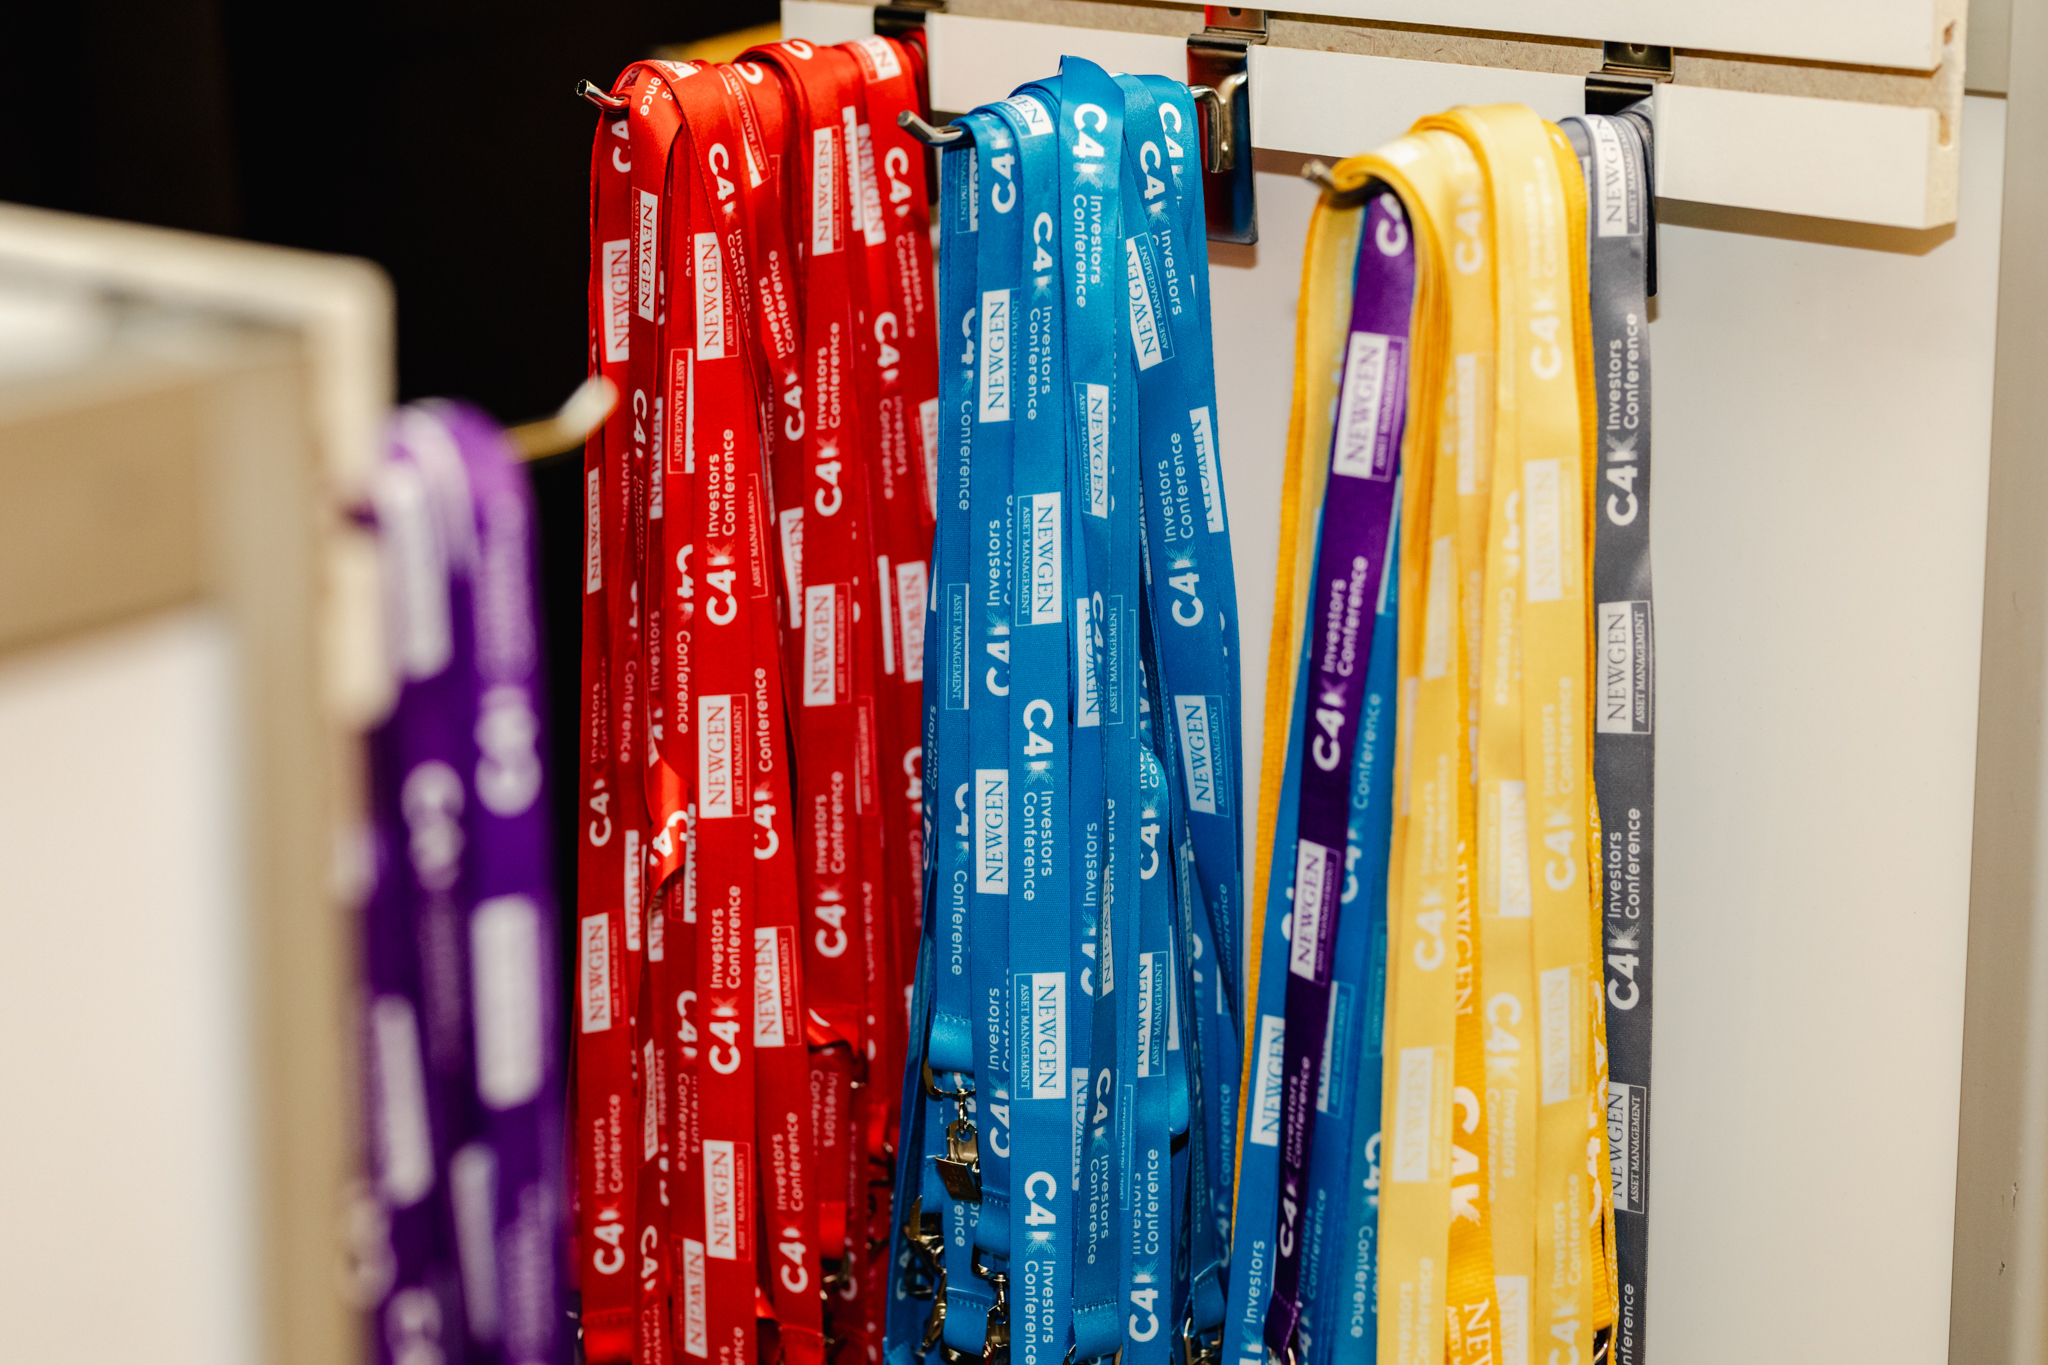 A group of conference lanyards hanging on a rack.